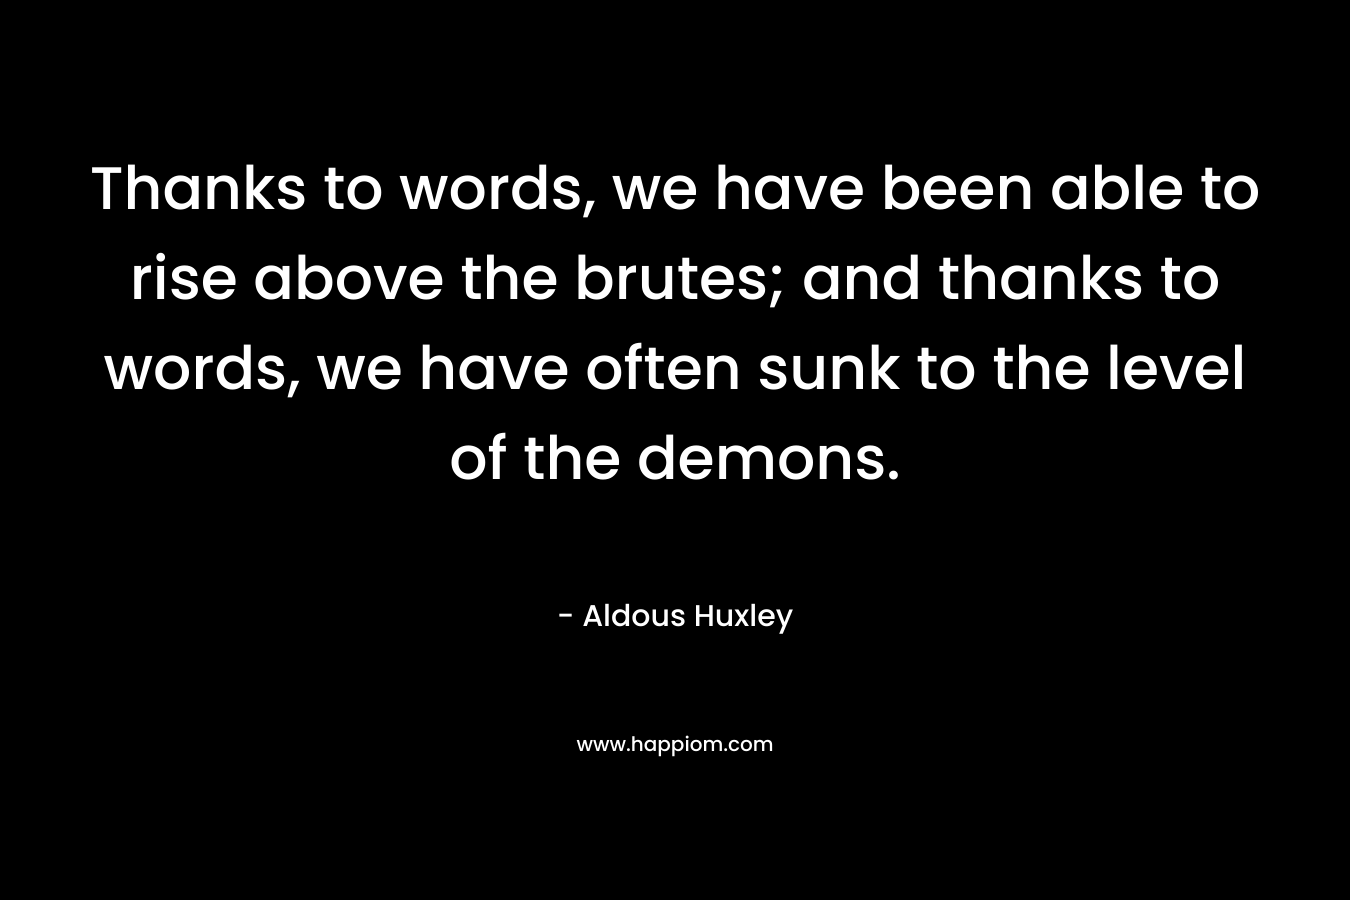 Thanks to words, we have been able to rise above the brutes; and thanks to words, we have often sunk to the level of the demons.